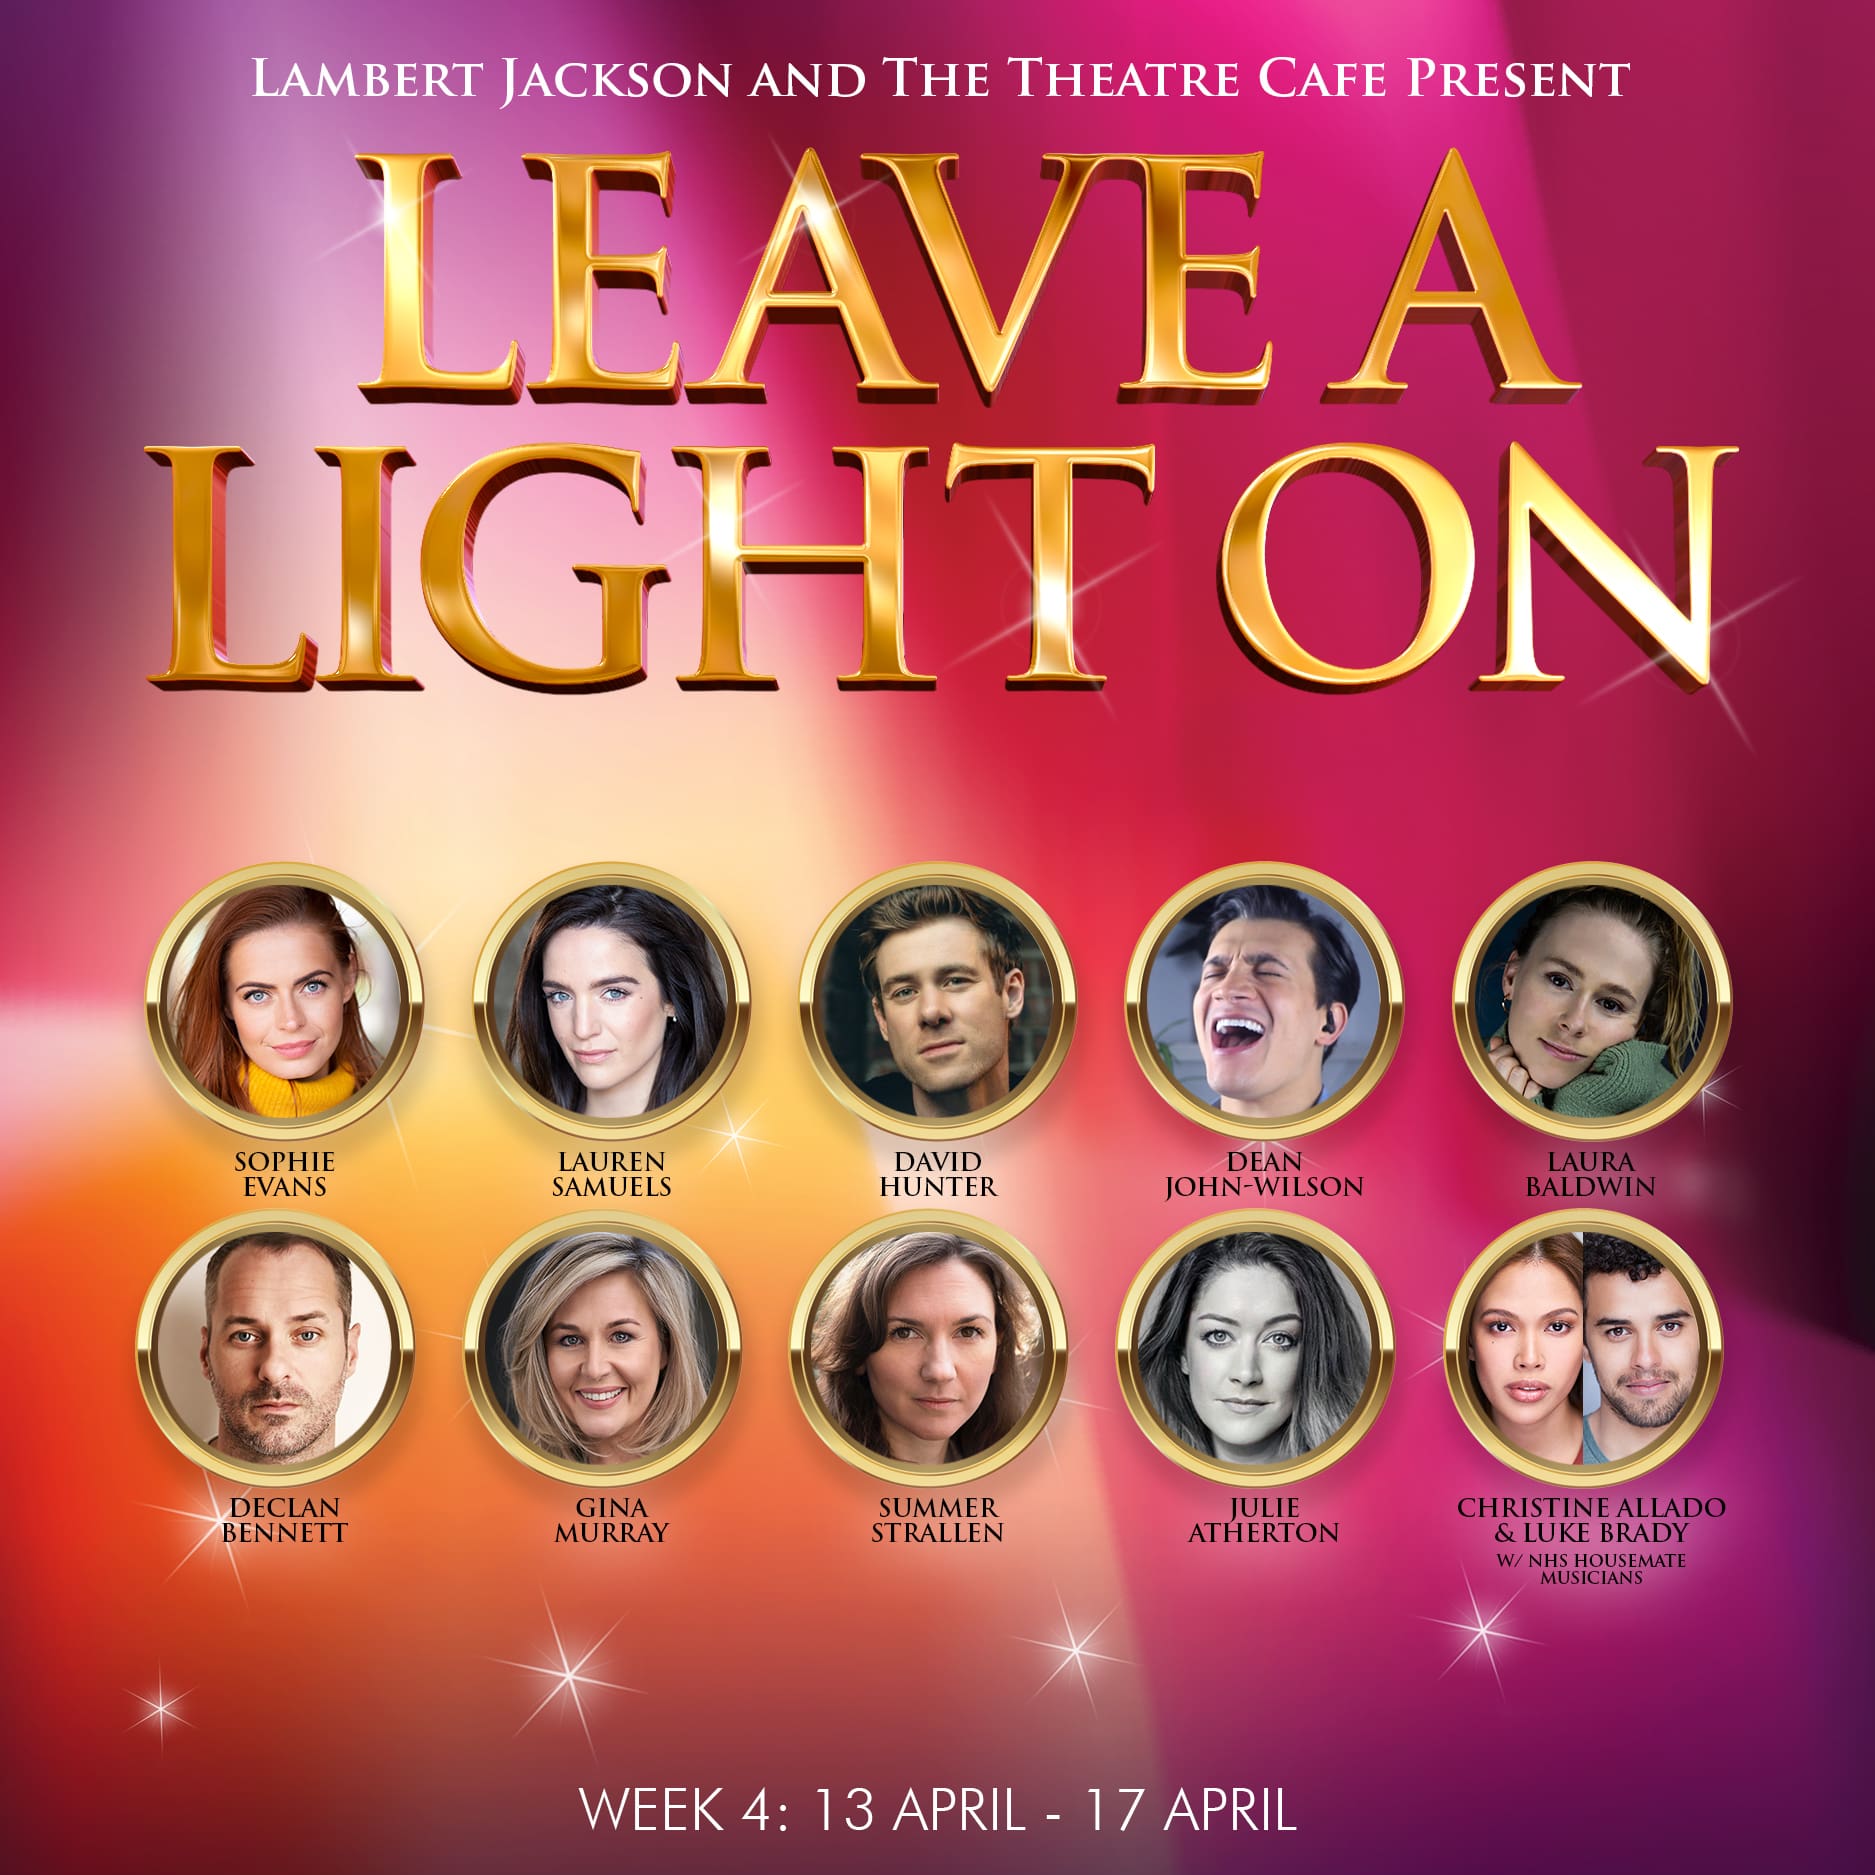 NEWS: Lineup announced for week 4 of Leave A Light On